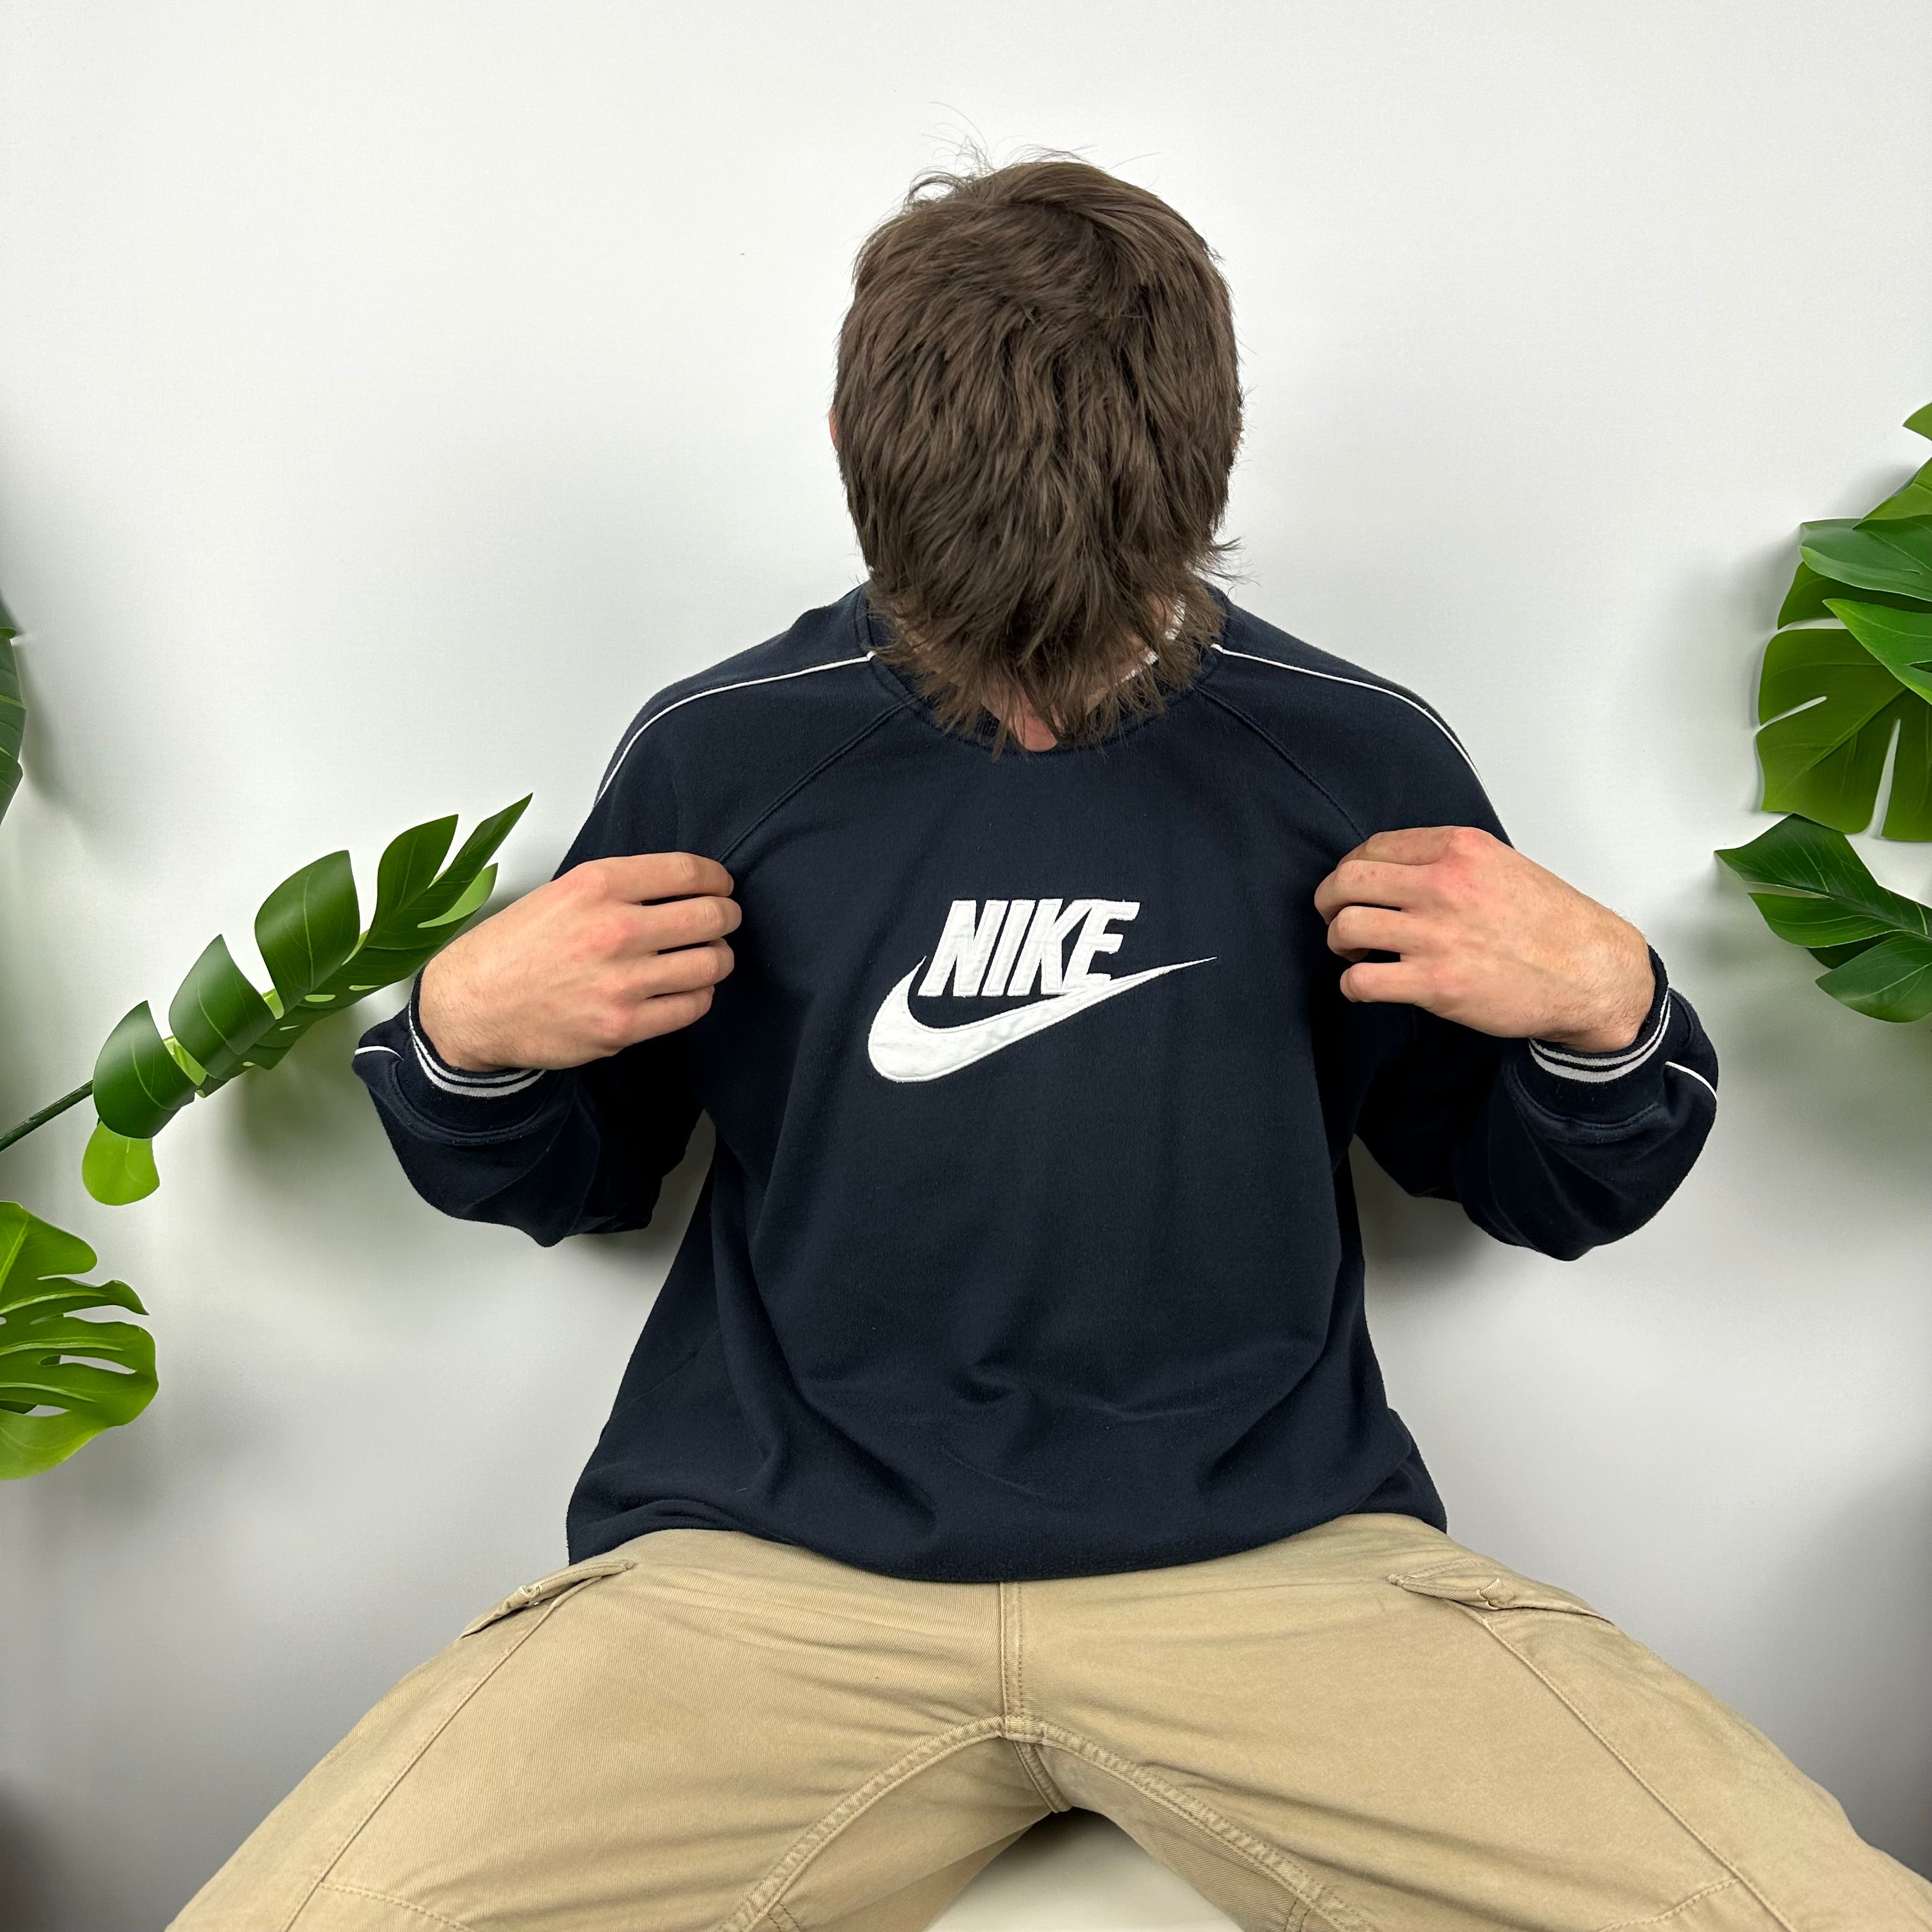 Nike Navy Embroidered Spell Out Sweatshirt (XL)